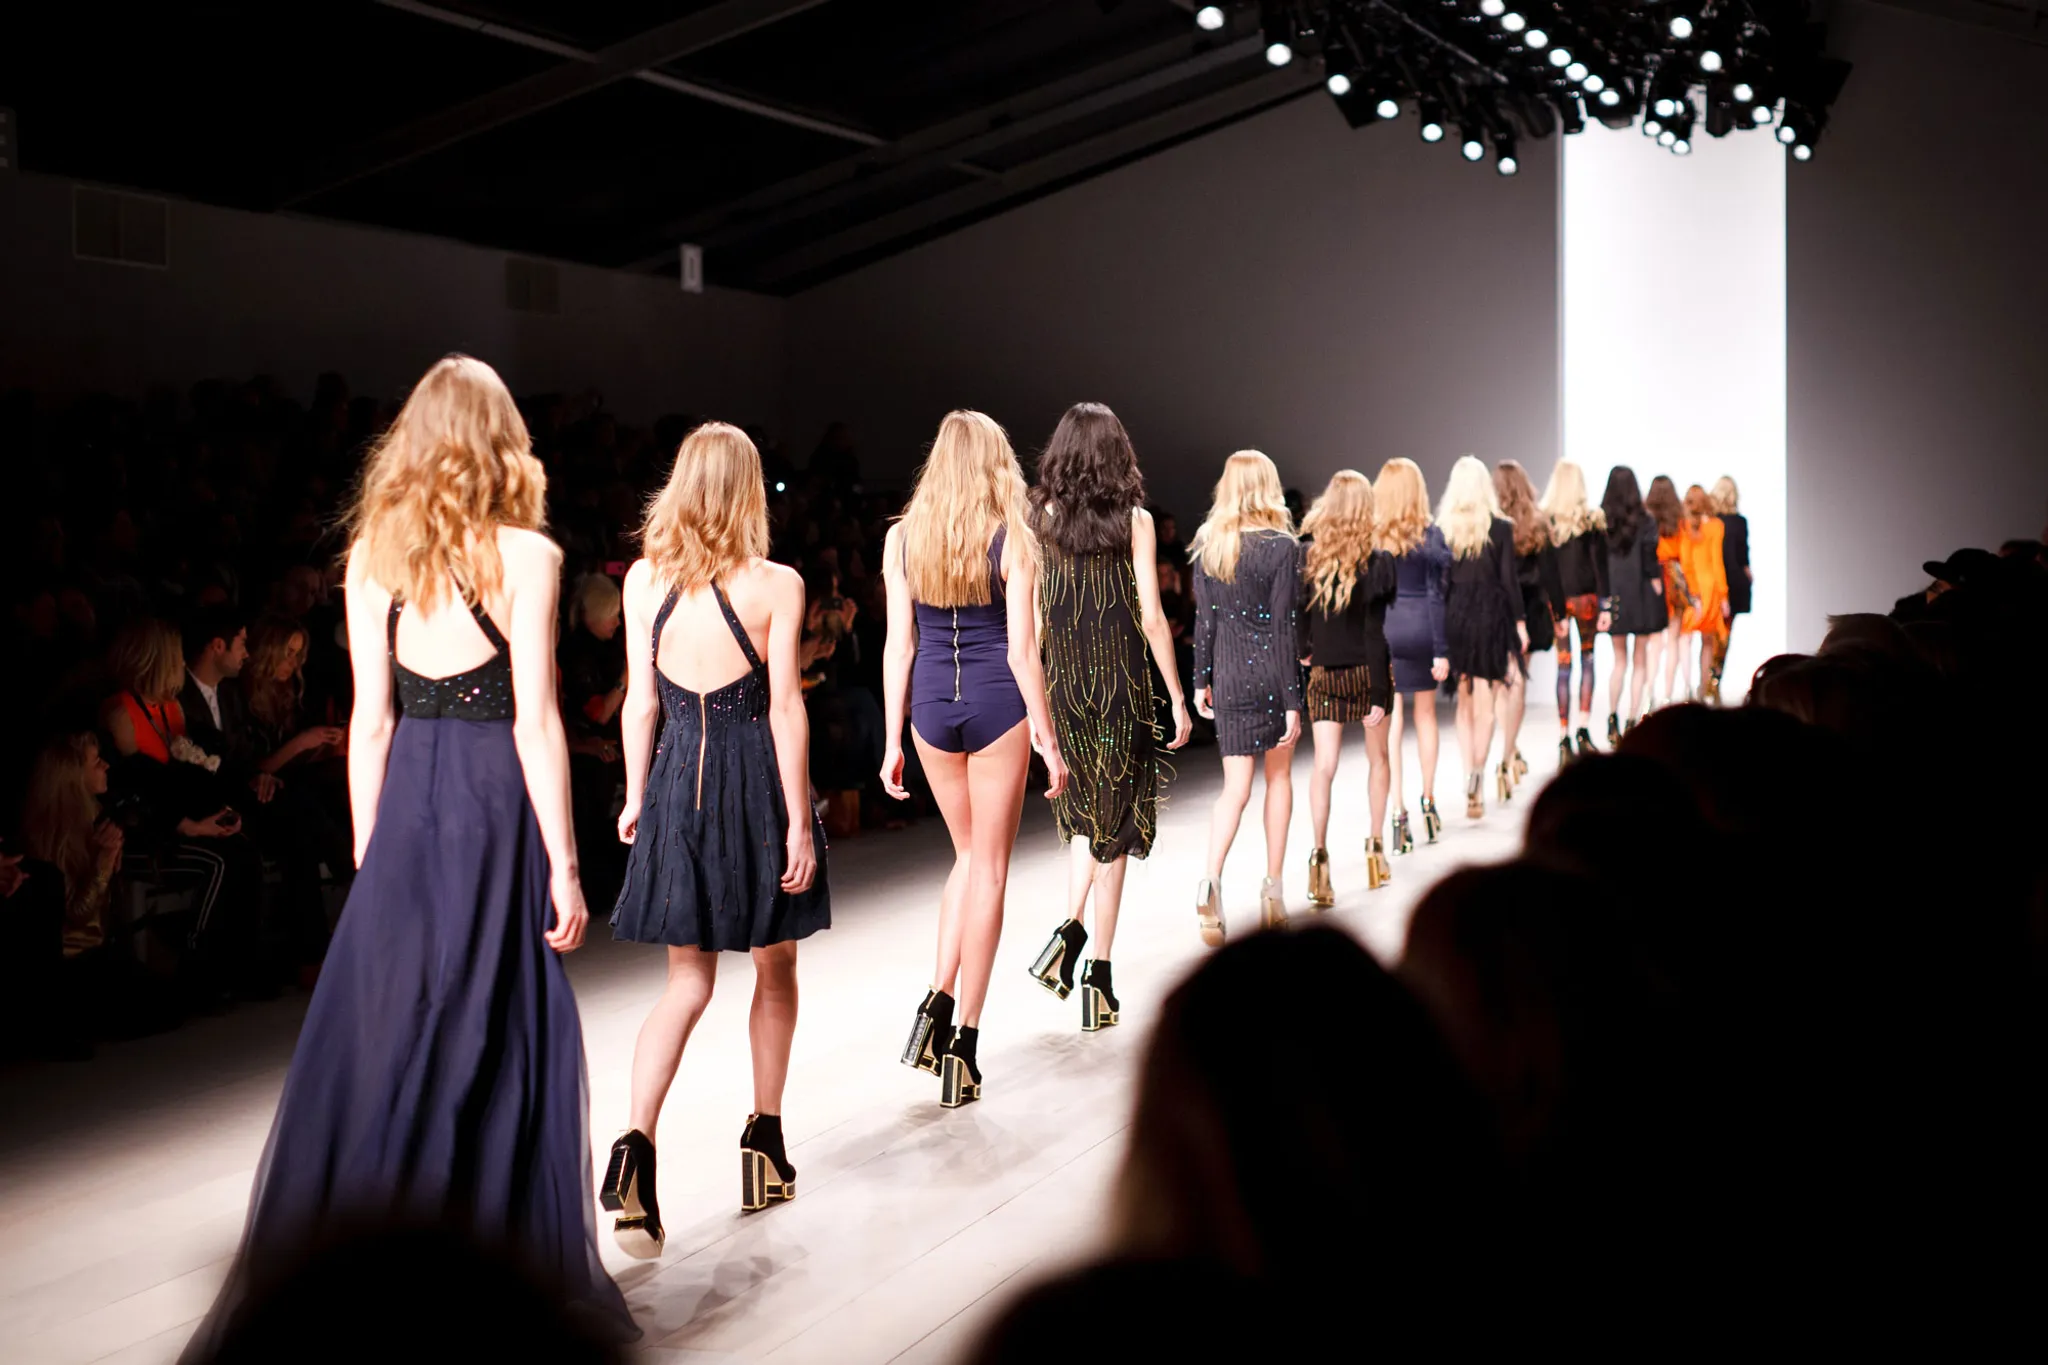 Top 10 of the Largest Clothing and Fashion Shows, Fairs, Events in the world